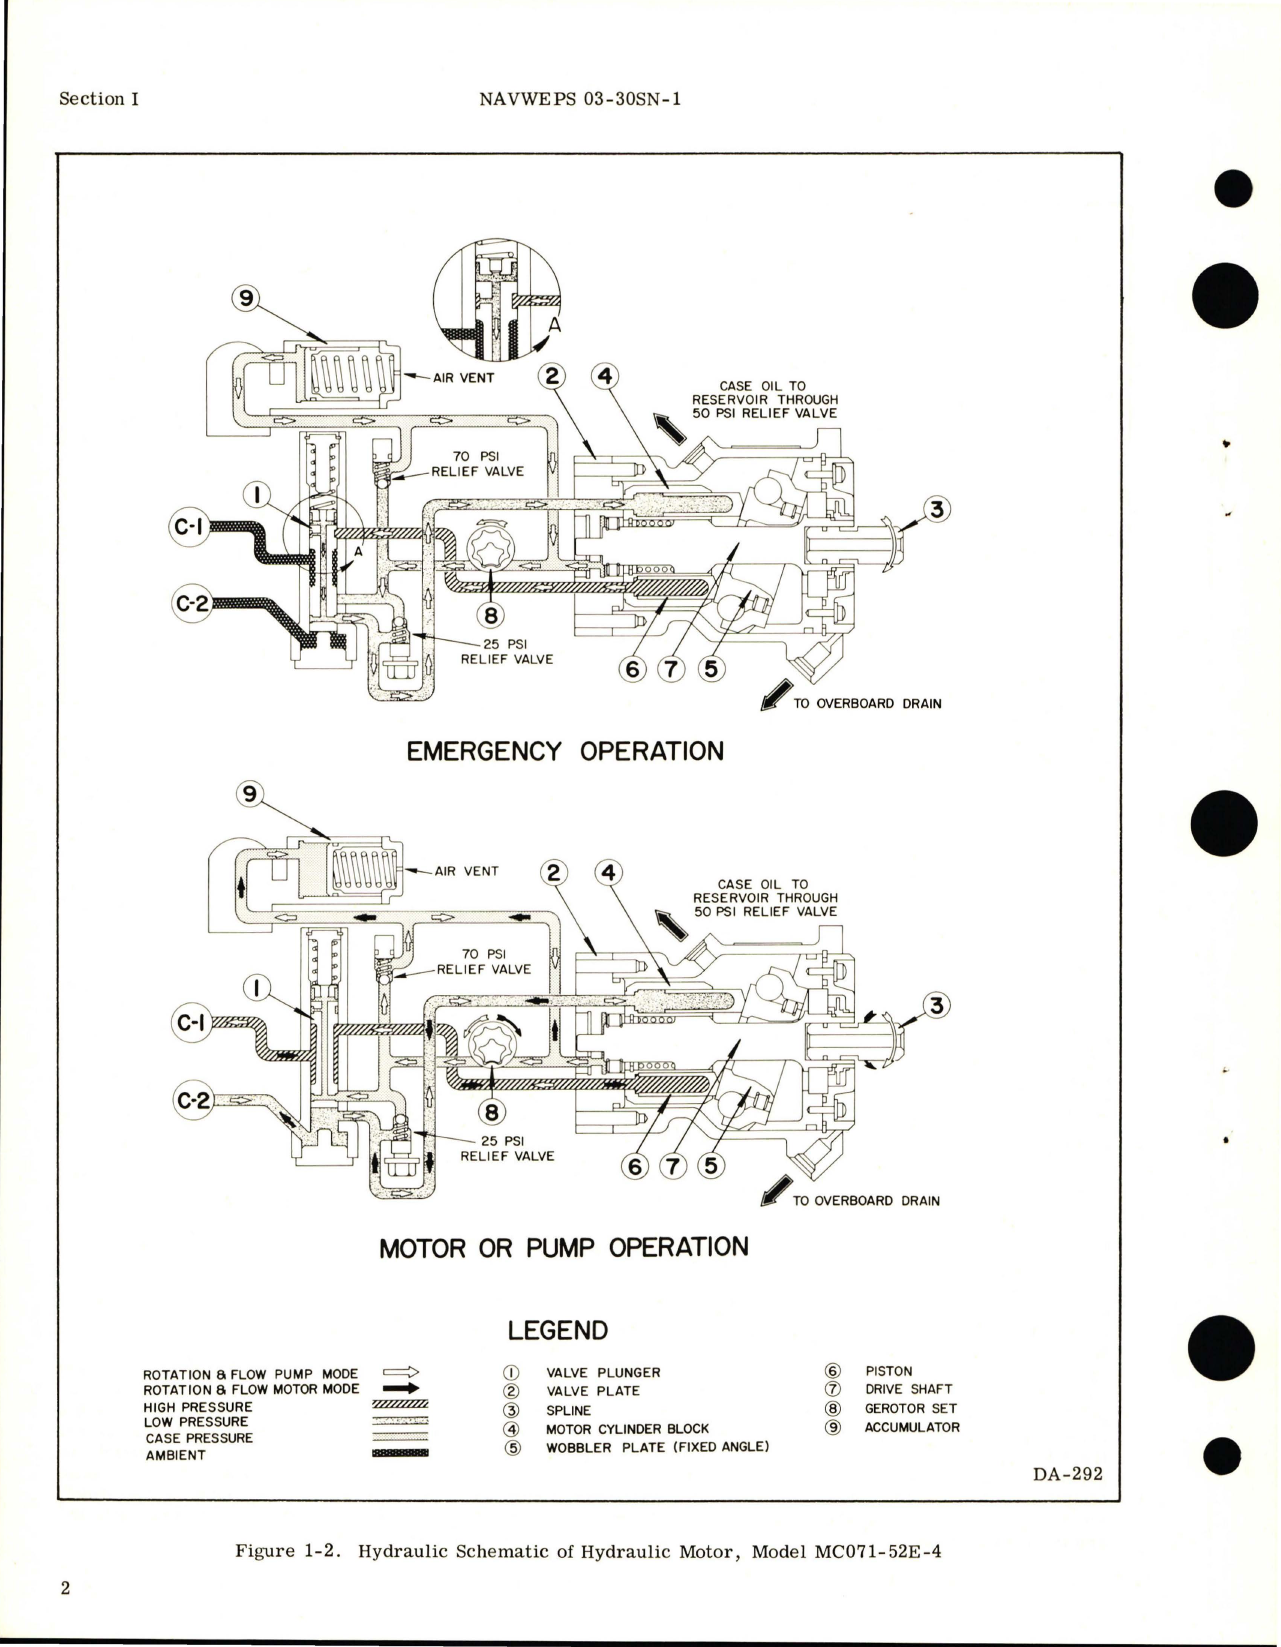 Sample page 6 from AirCorps Library document: Overhaul Instructions for Hydraulic Motor - Parts 684314, 685952, 685952A, and 685952B